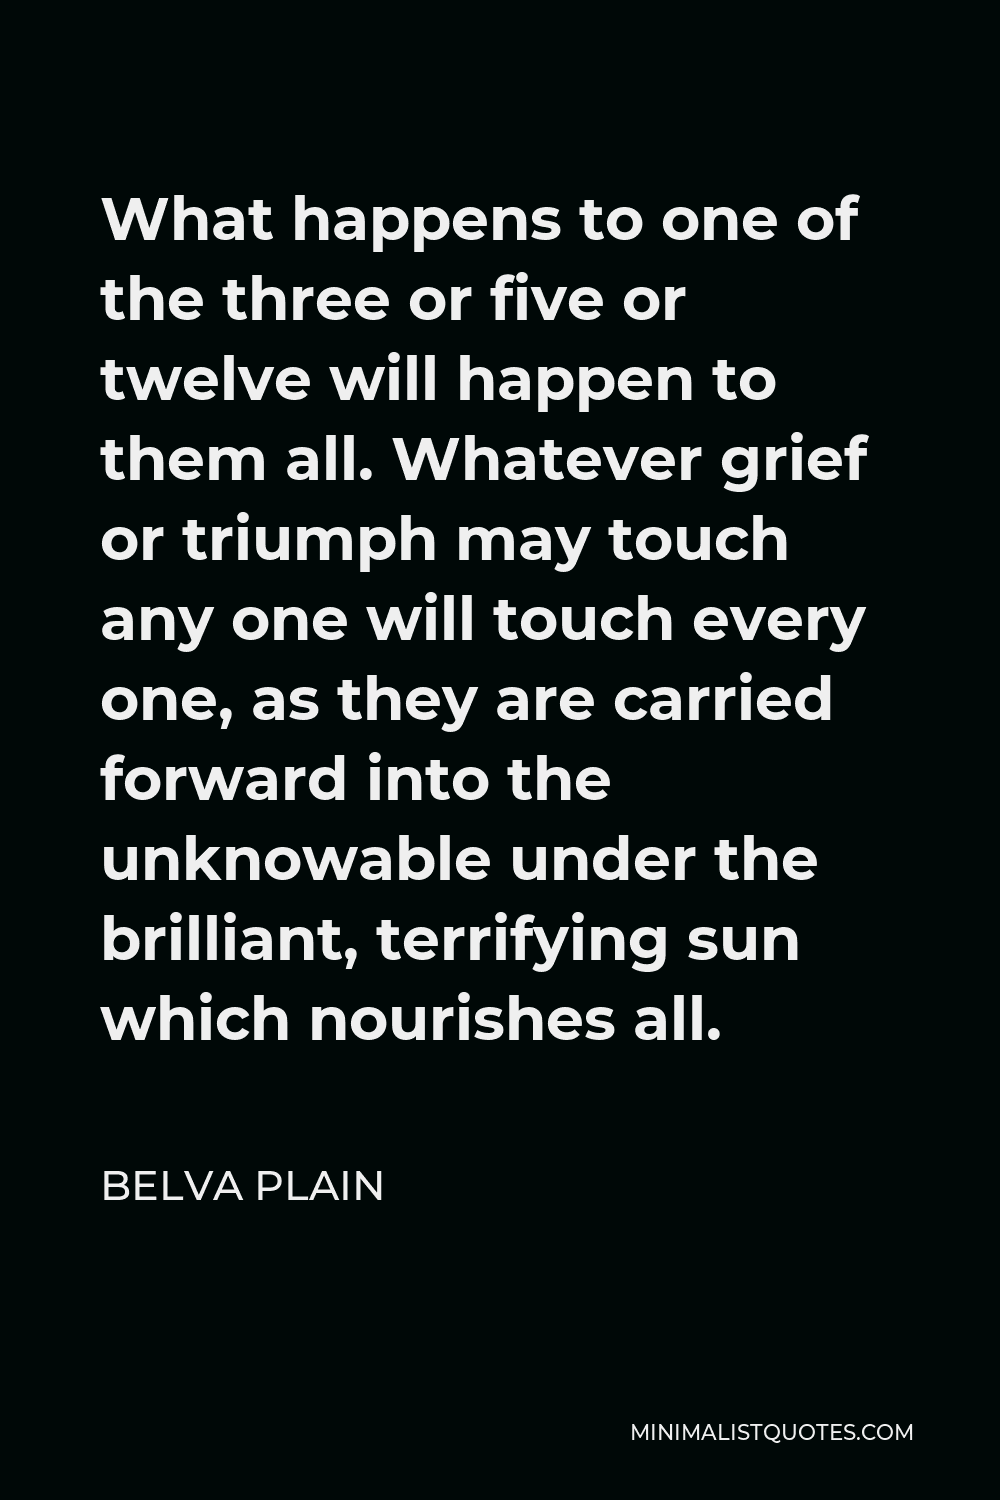 Belva Plain Quote - What happens to one of the three or five or twelve will happen to them all. Whatever grief or triumph may touch any one will touch every one, as they are carried forward into the unknowable under the brilliant, terrifying sun which nourishes all.